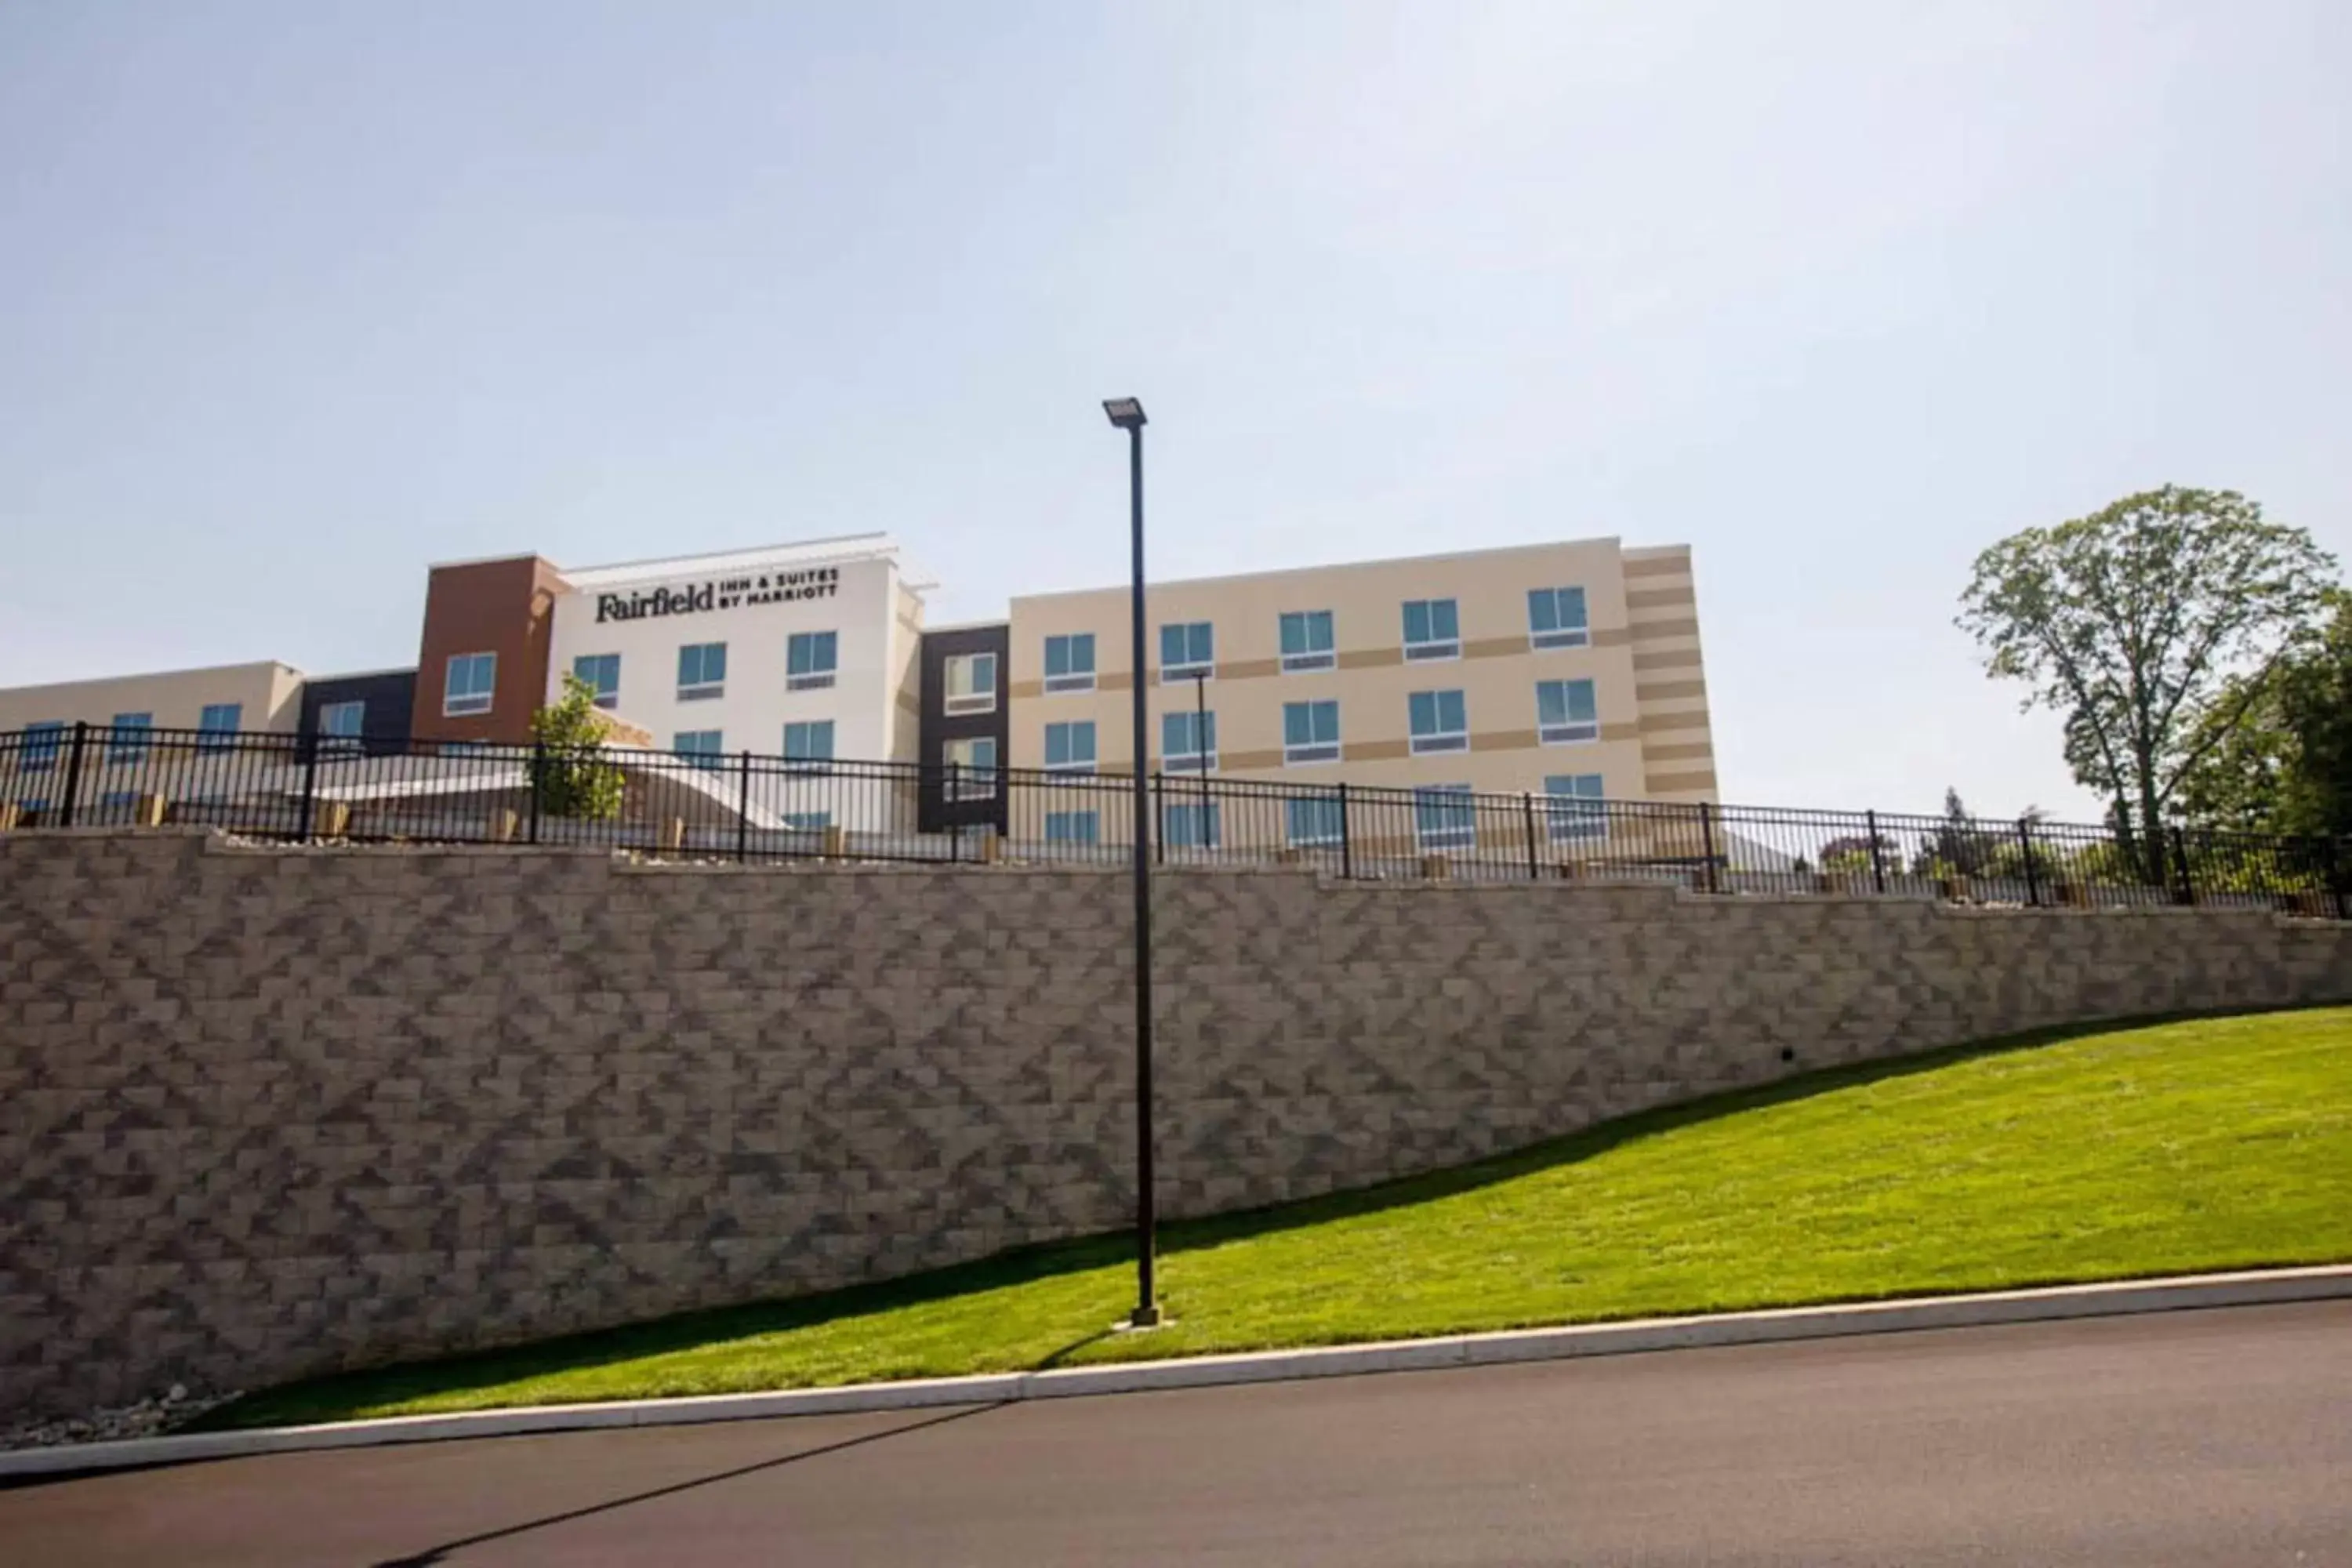 Property Building in Fairfield Inn & Suites by Marriott Philadelphia Broomall/Newtown Square